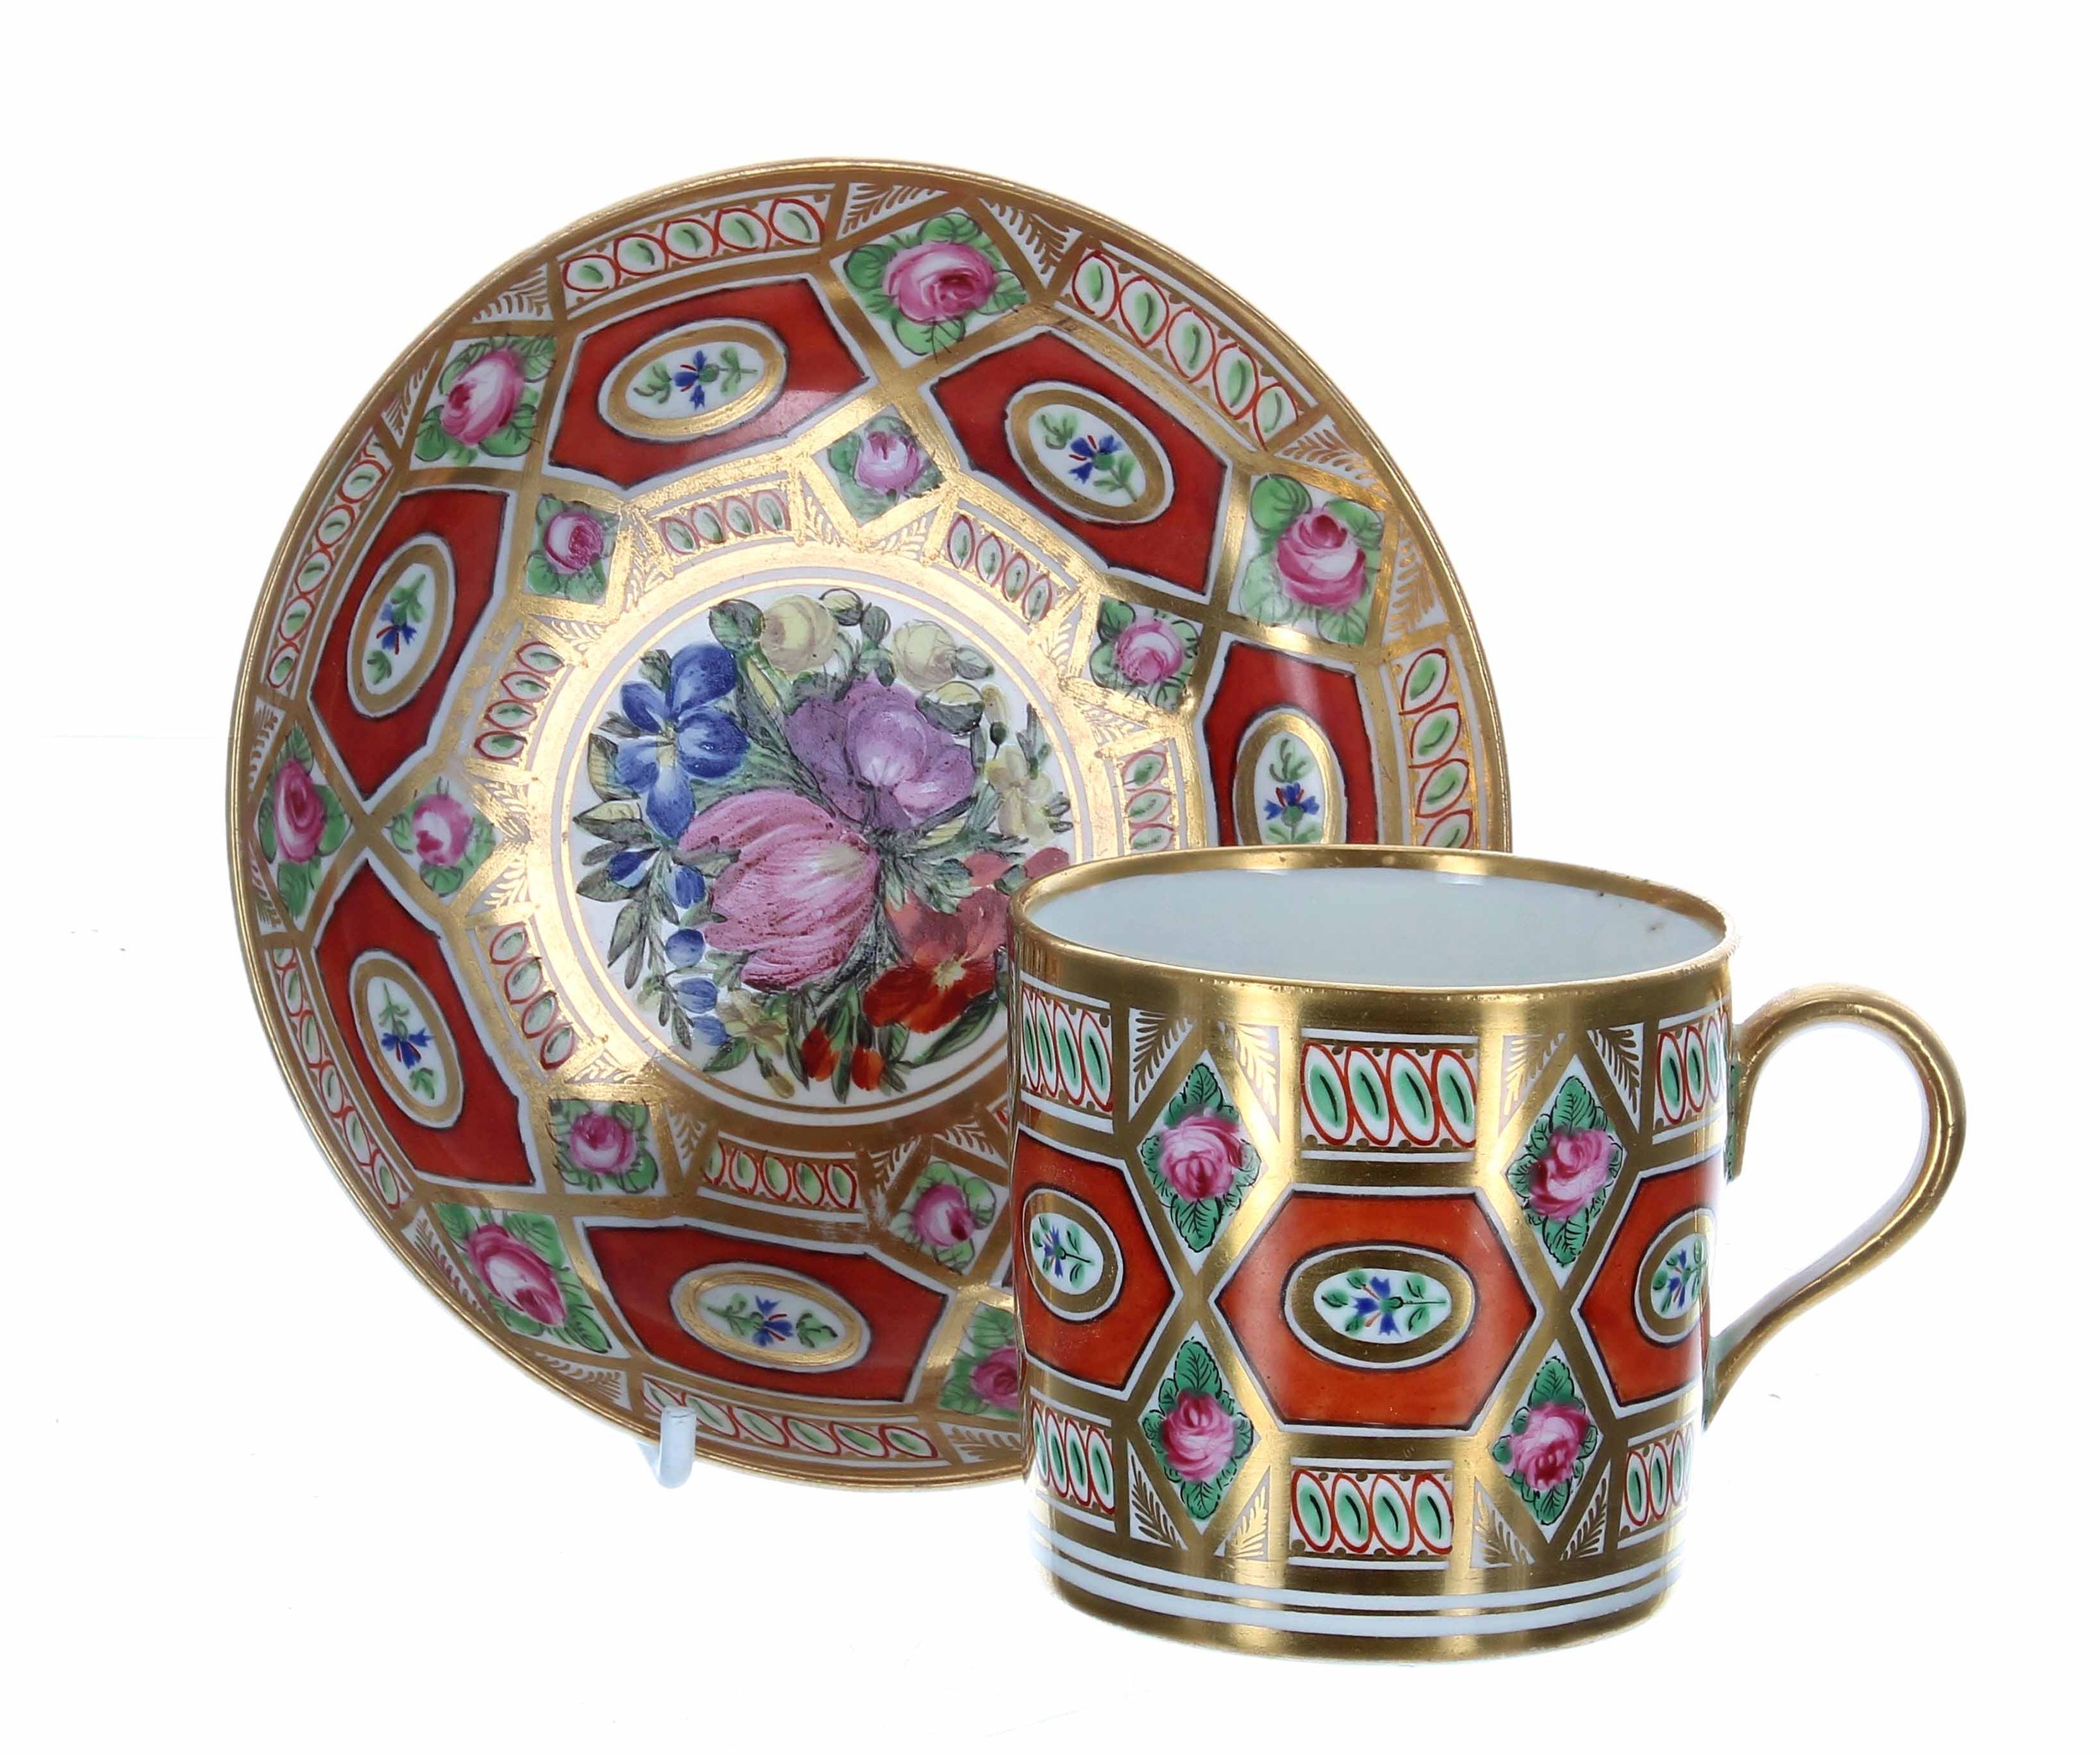 Fine Coalport porcelain coffee can and saucer, early 19th century, finely painted with summer